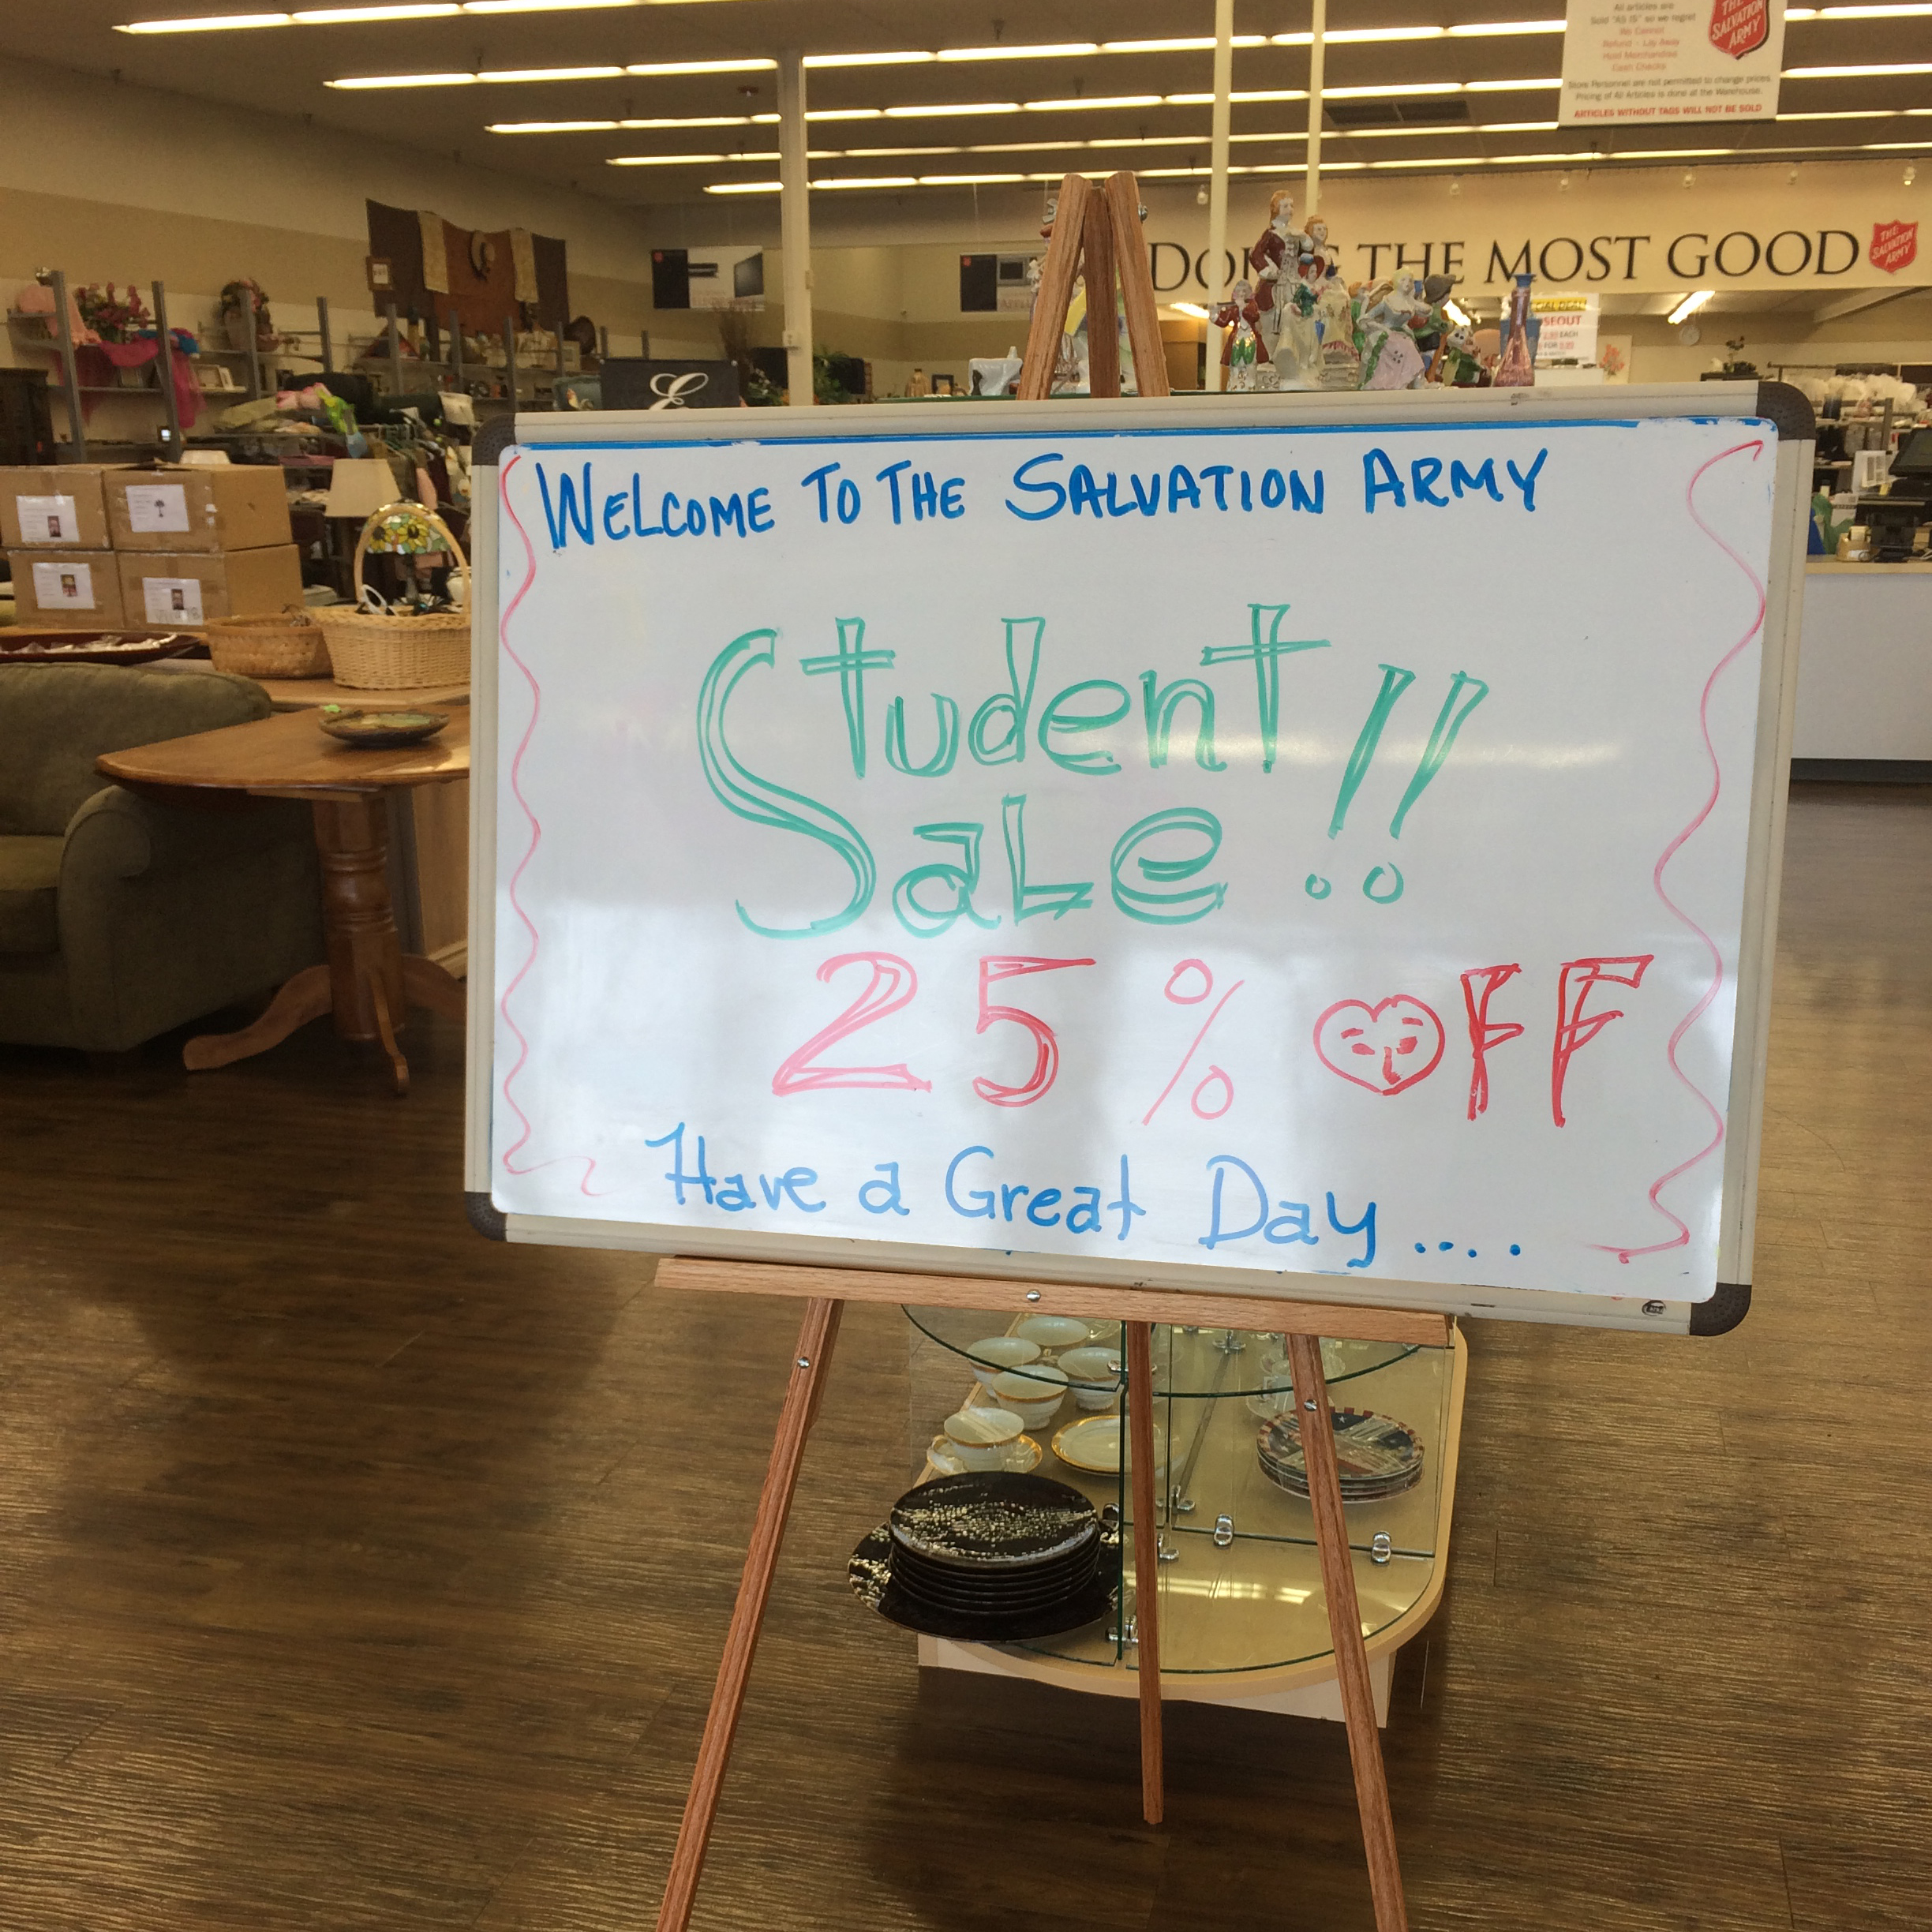 A sign advertising a thrift store sale